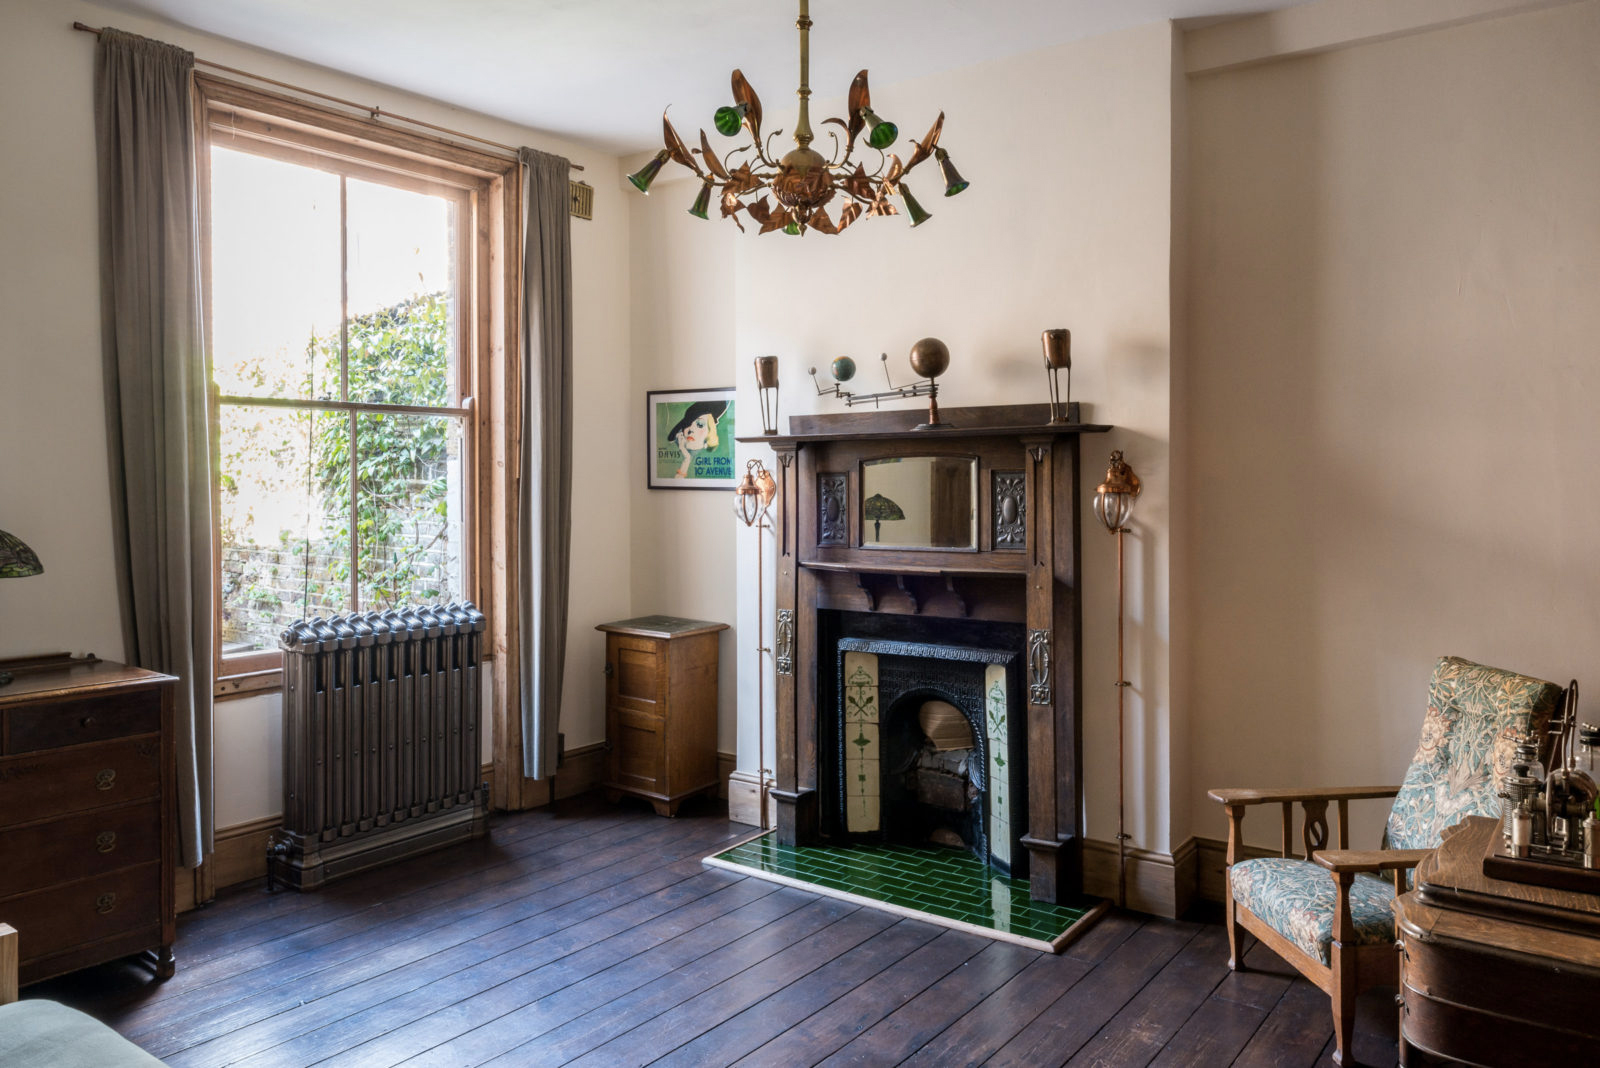 Converted Victorian butcher's for sale in London is decked in period features